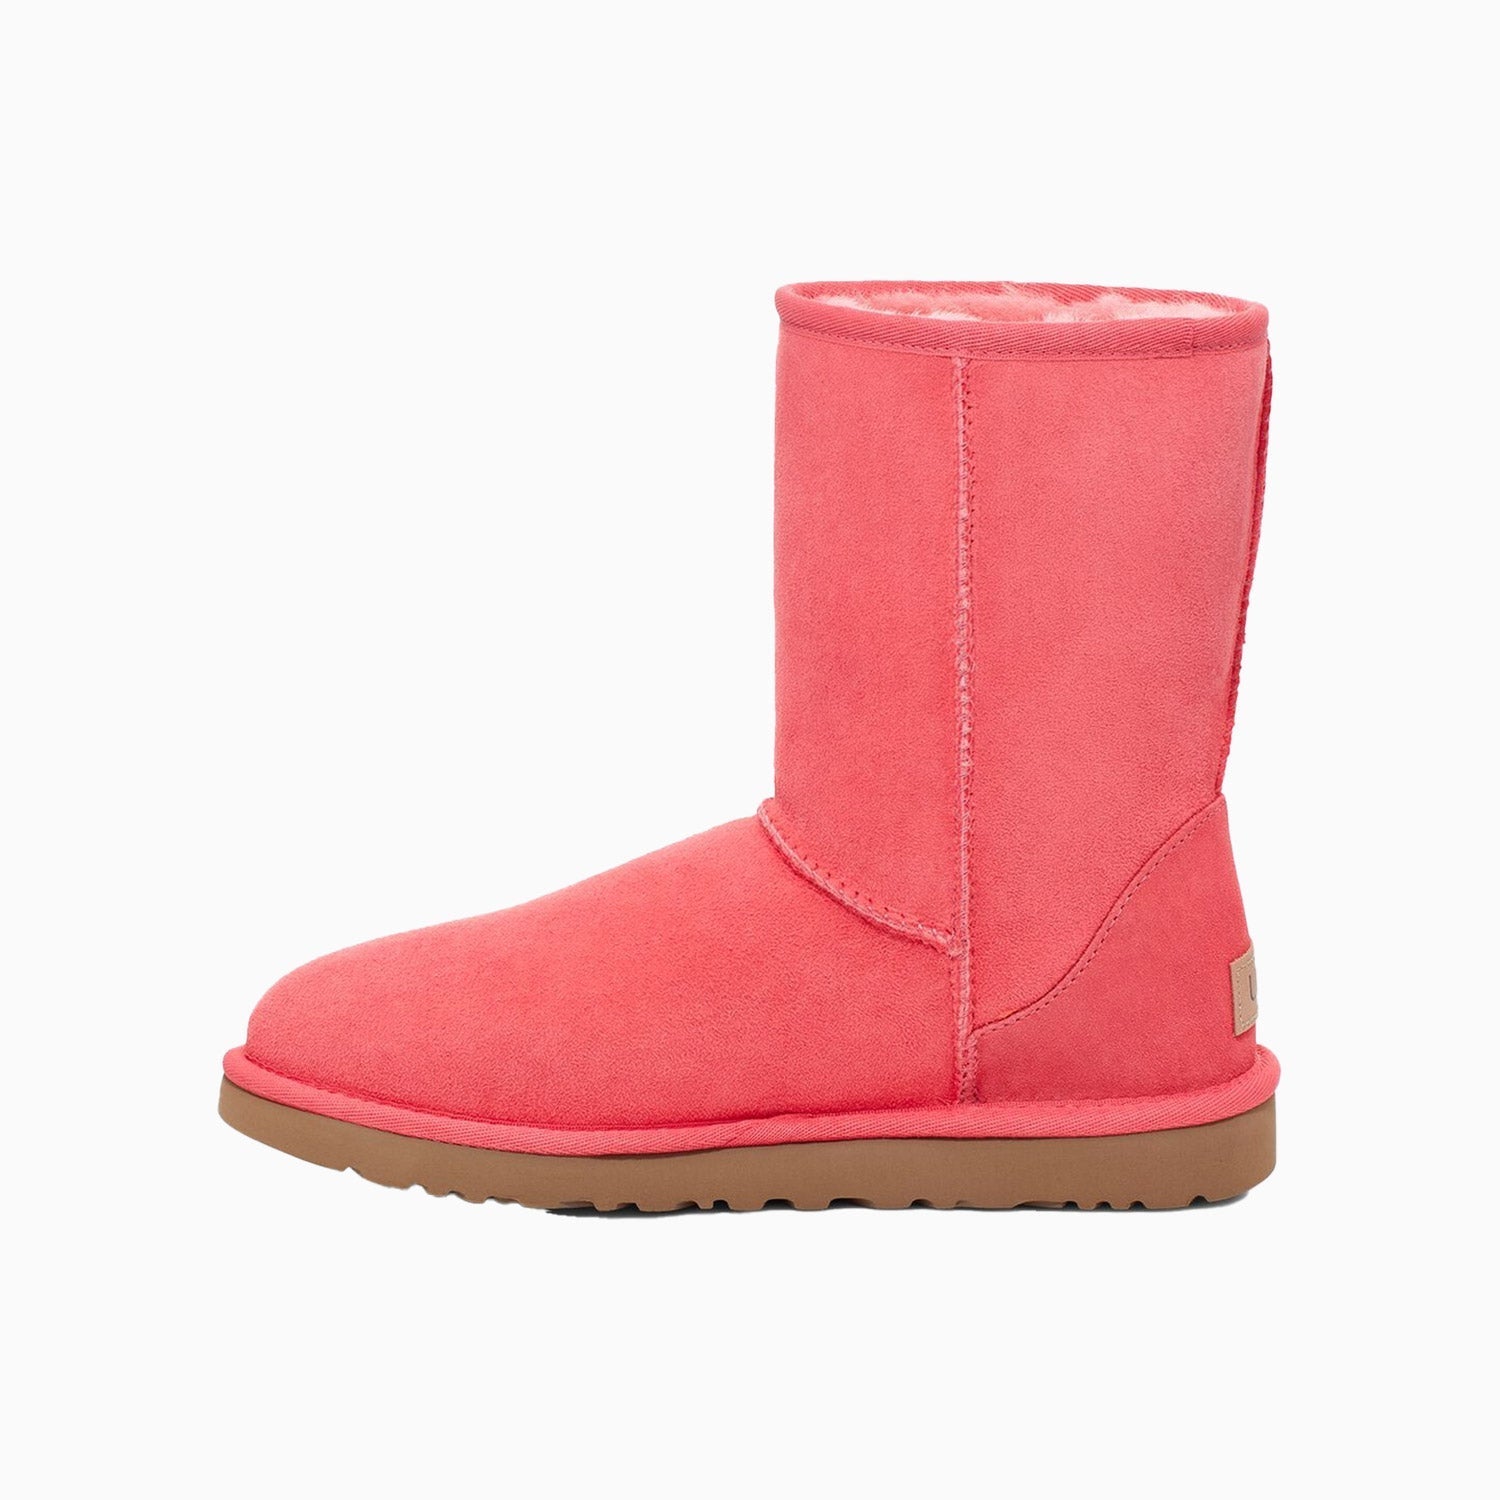 UGG Women's Classic II Boot - Color: Nantucket Coral - Tops and Bottoms USA -